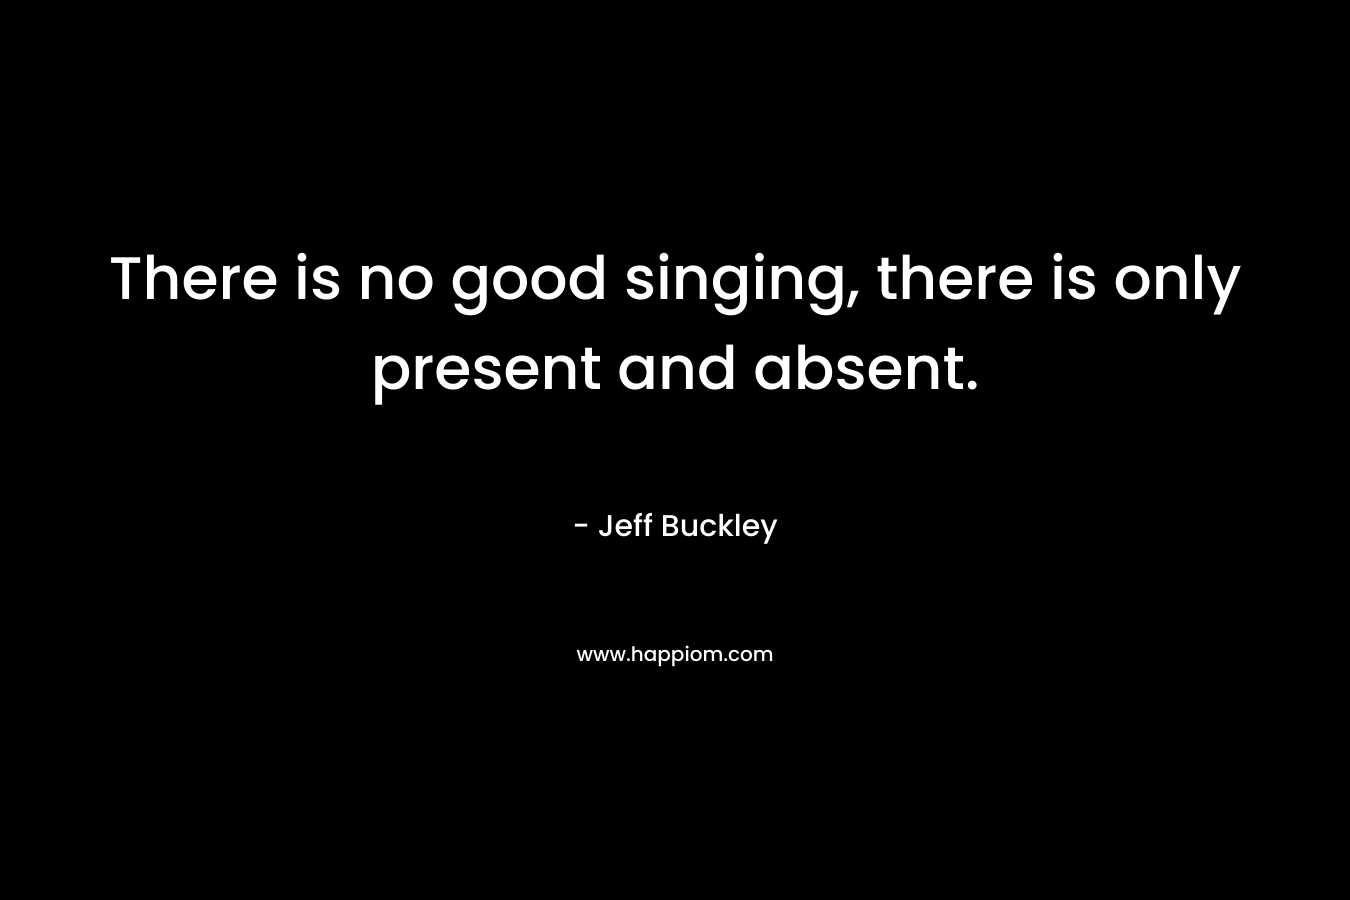 There is no good singing, there is only present and absent.